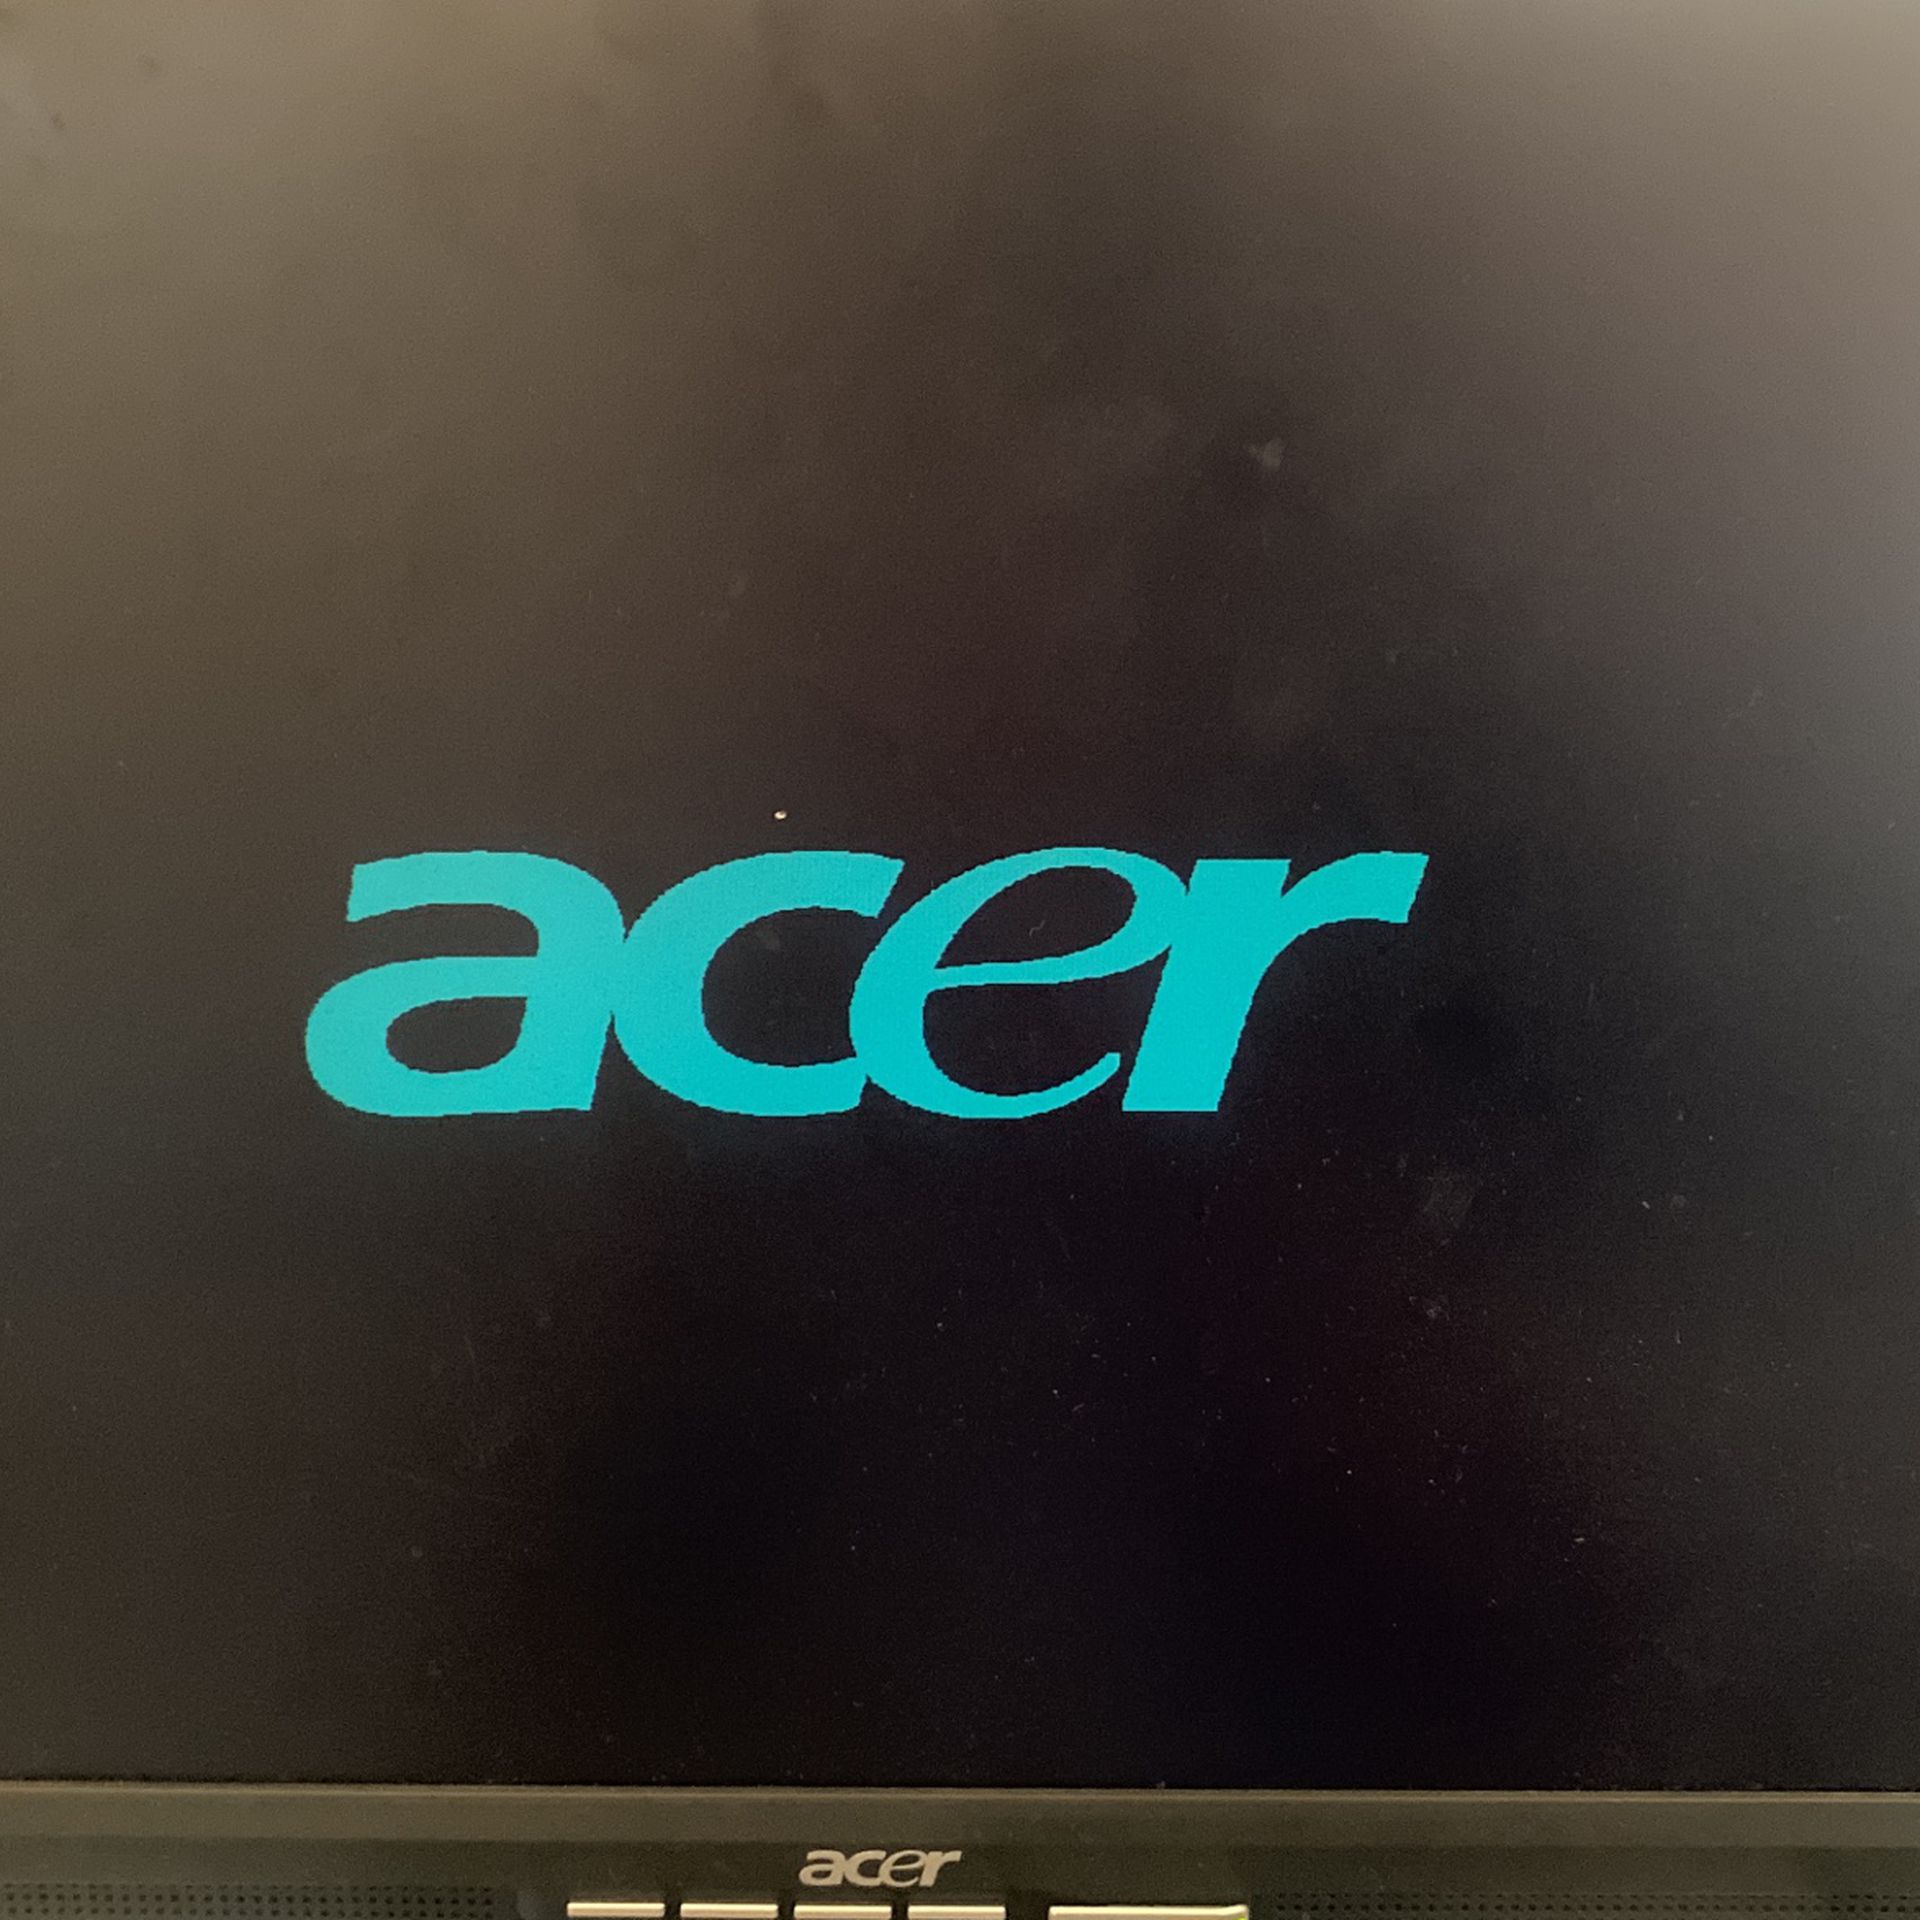 Acer computer Monitor